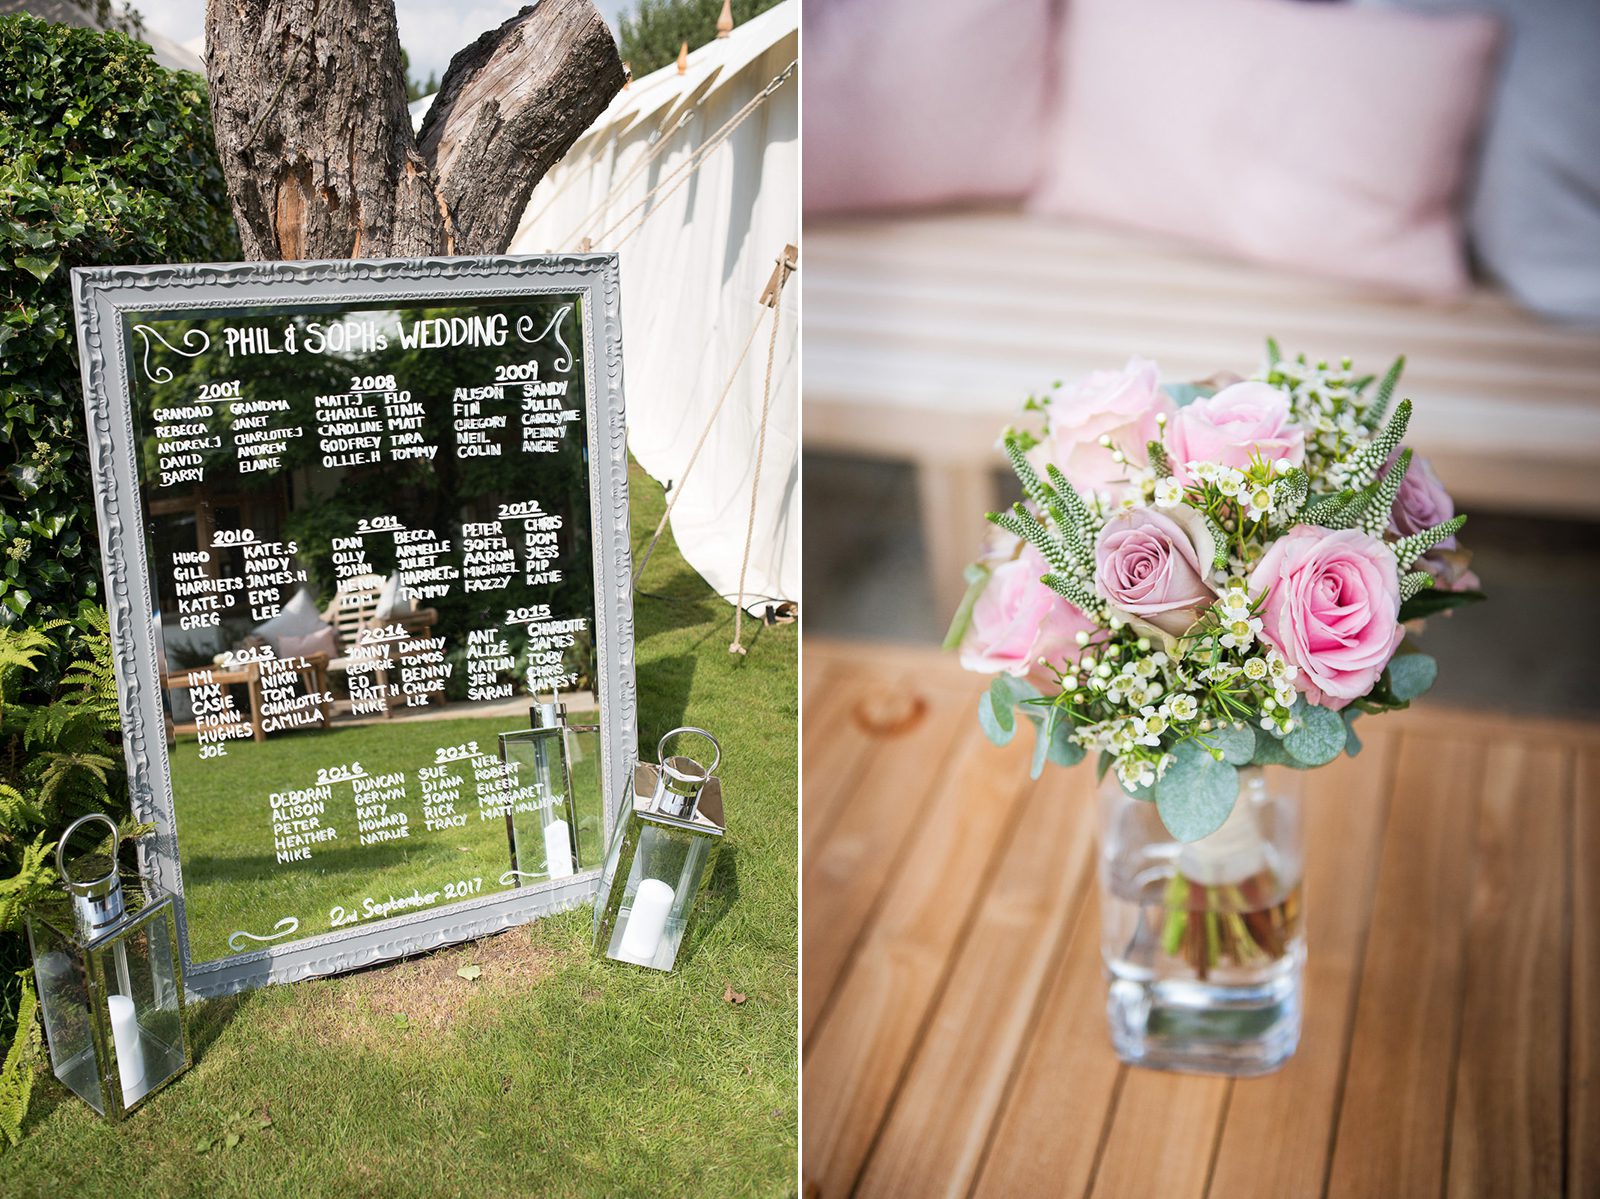 Summer wedding ideas with a large mirror place setting and pink roses.